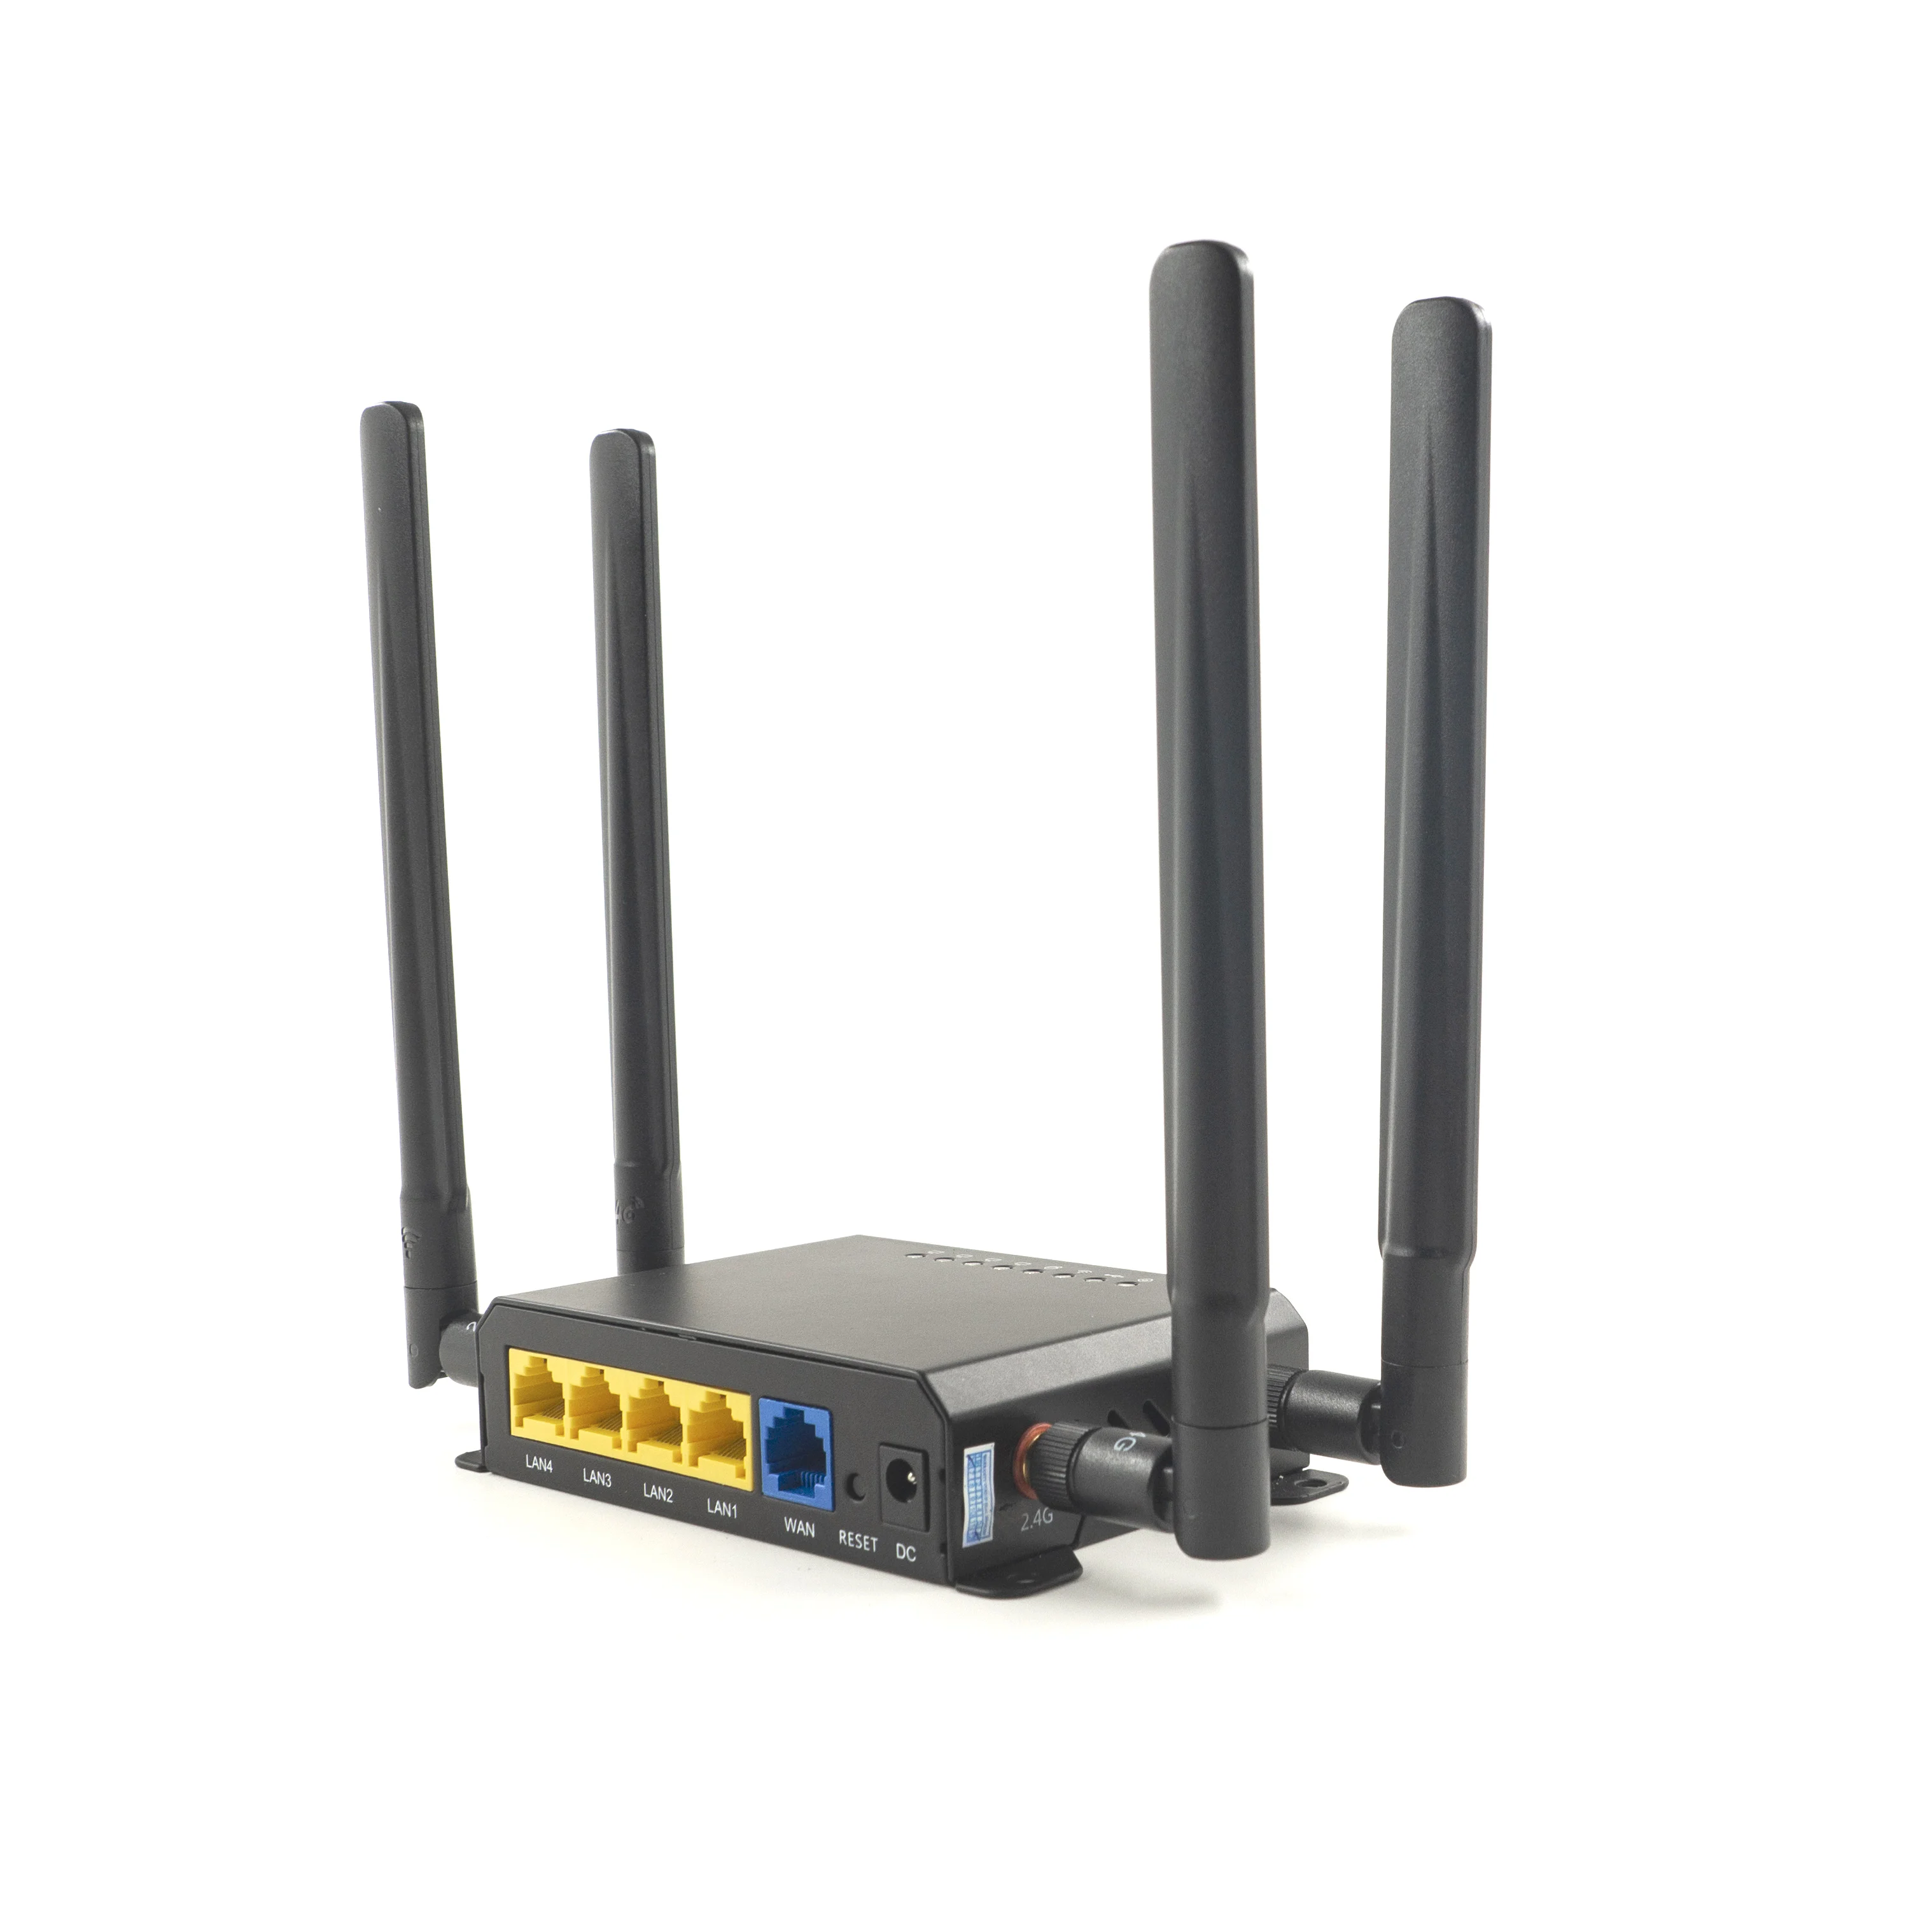 

we826-t2 MT7620A 300mbps openwrt 4g lte router with sim card slot support VPN L2tP for ec25 ep06 modem